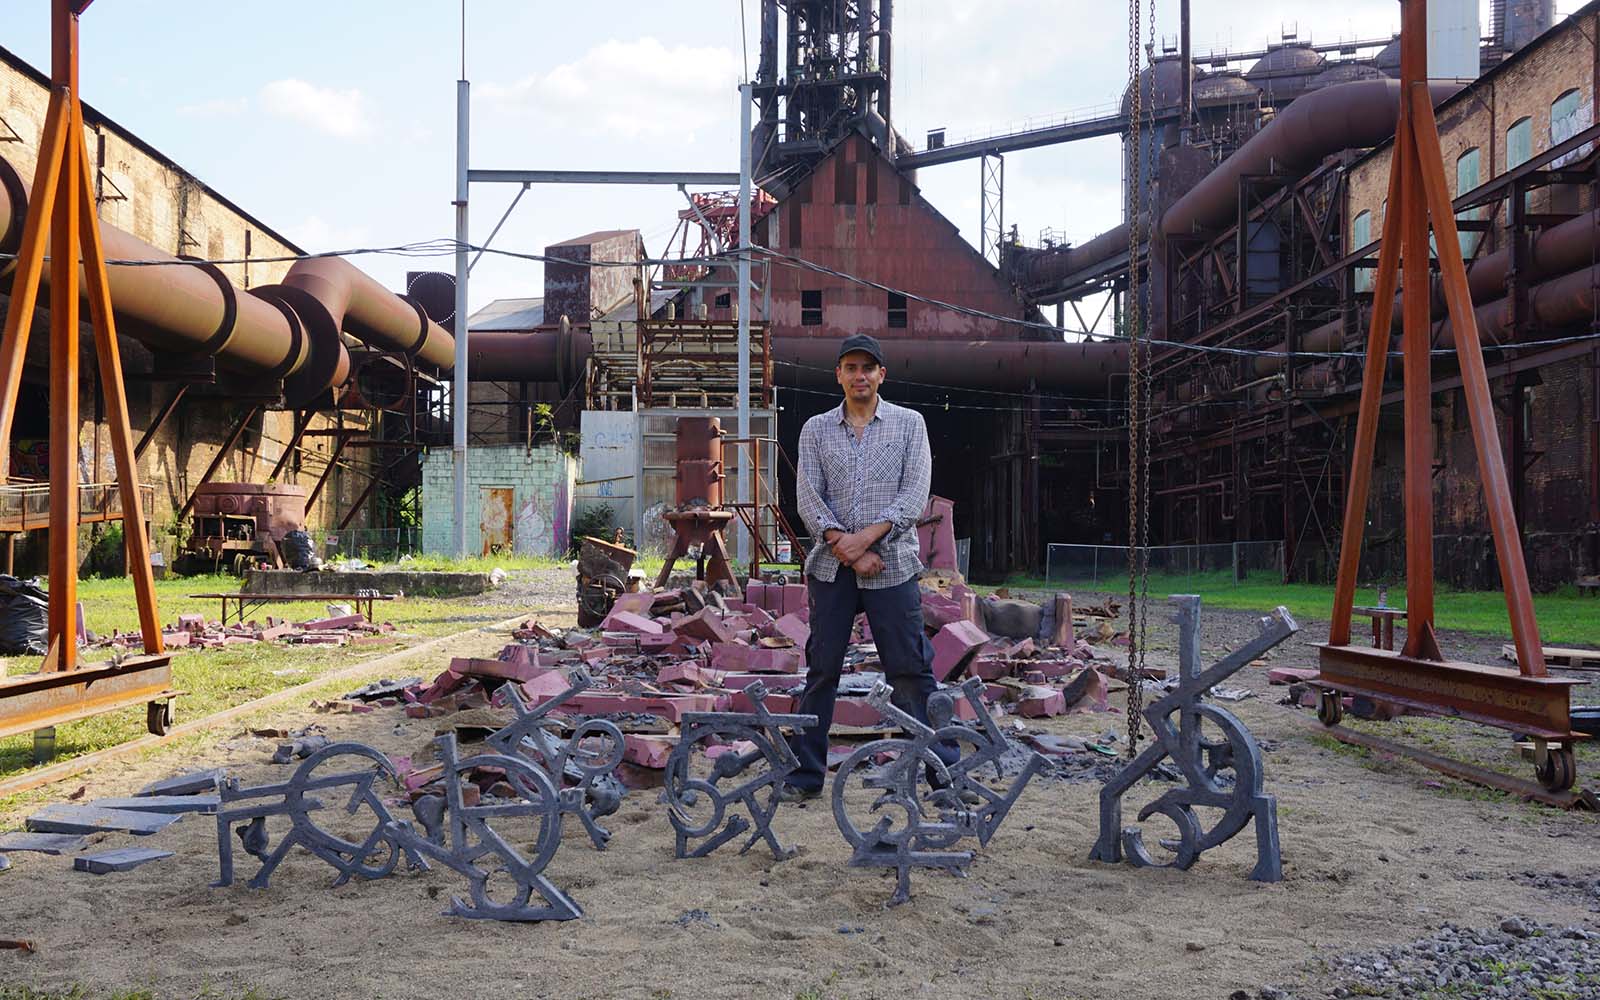 a man stands with sculptures in front of a small scale iron furnaces with an industrail former blast furnace behind them